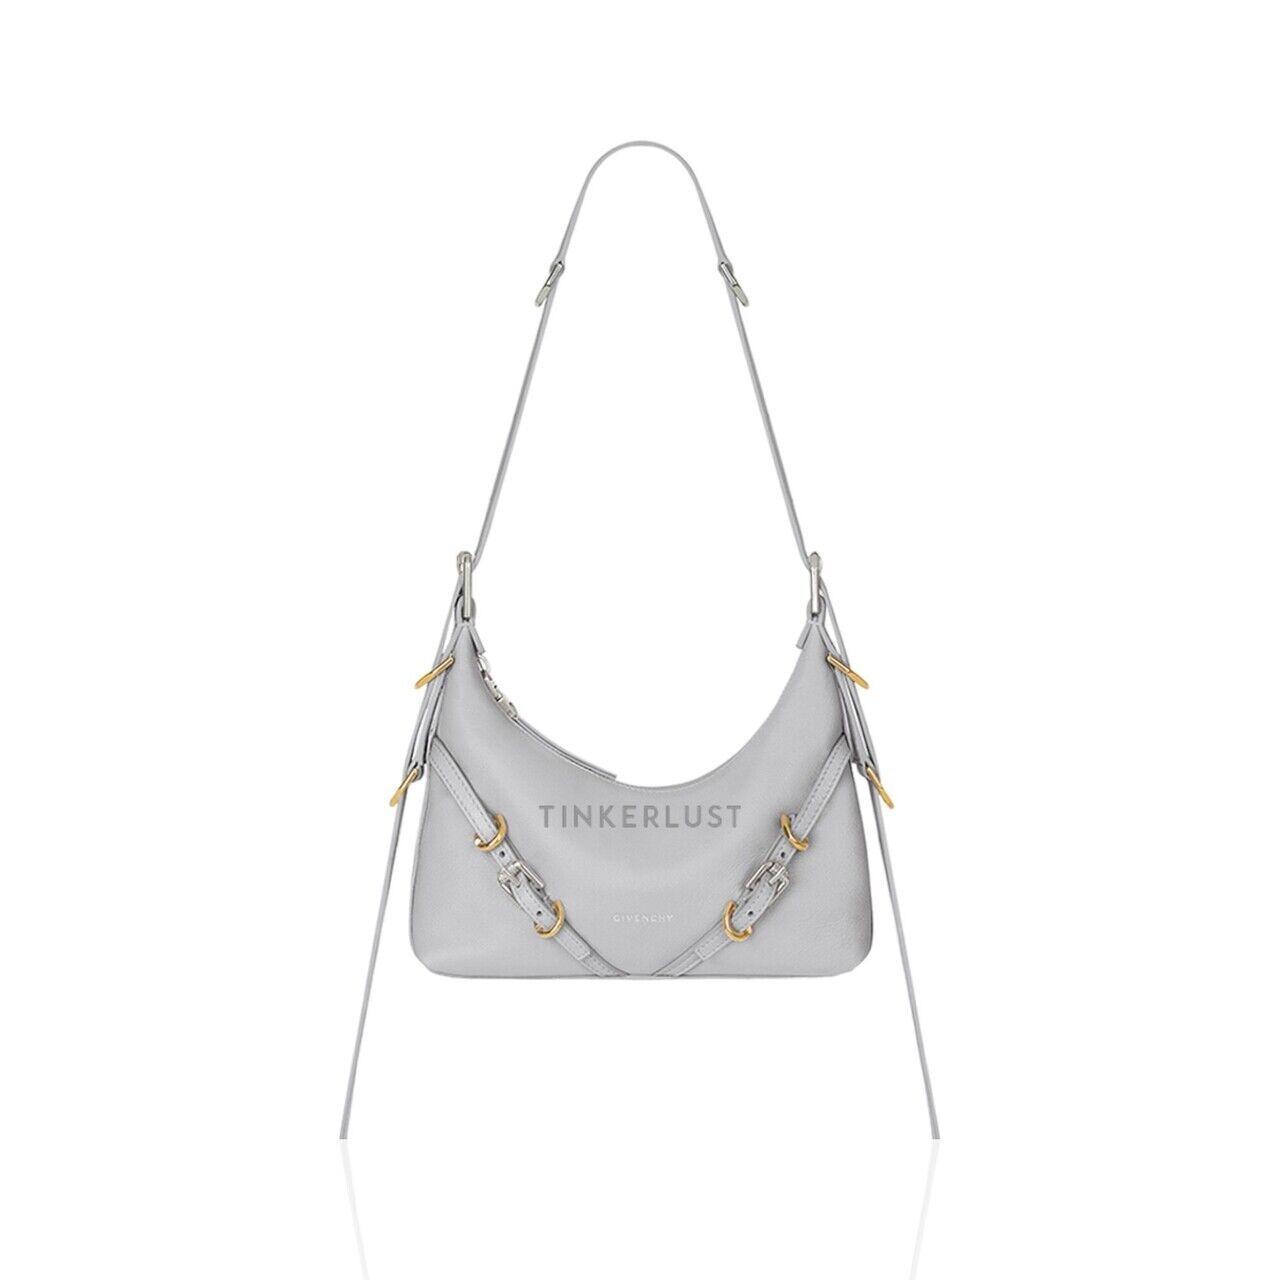 Givenchy Mini Voyou Crossbody Bag in Light Grey Tumbled Calfskin Leather